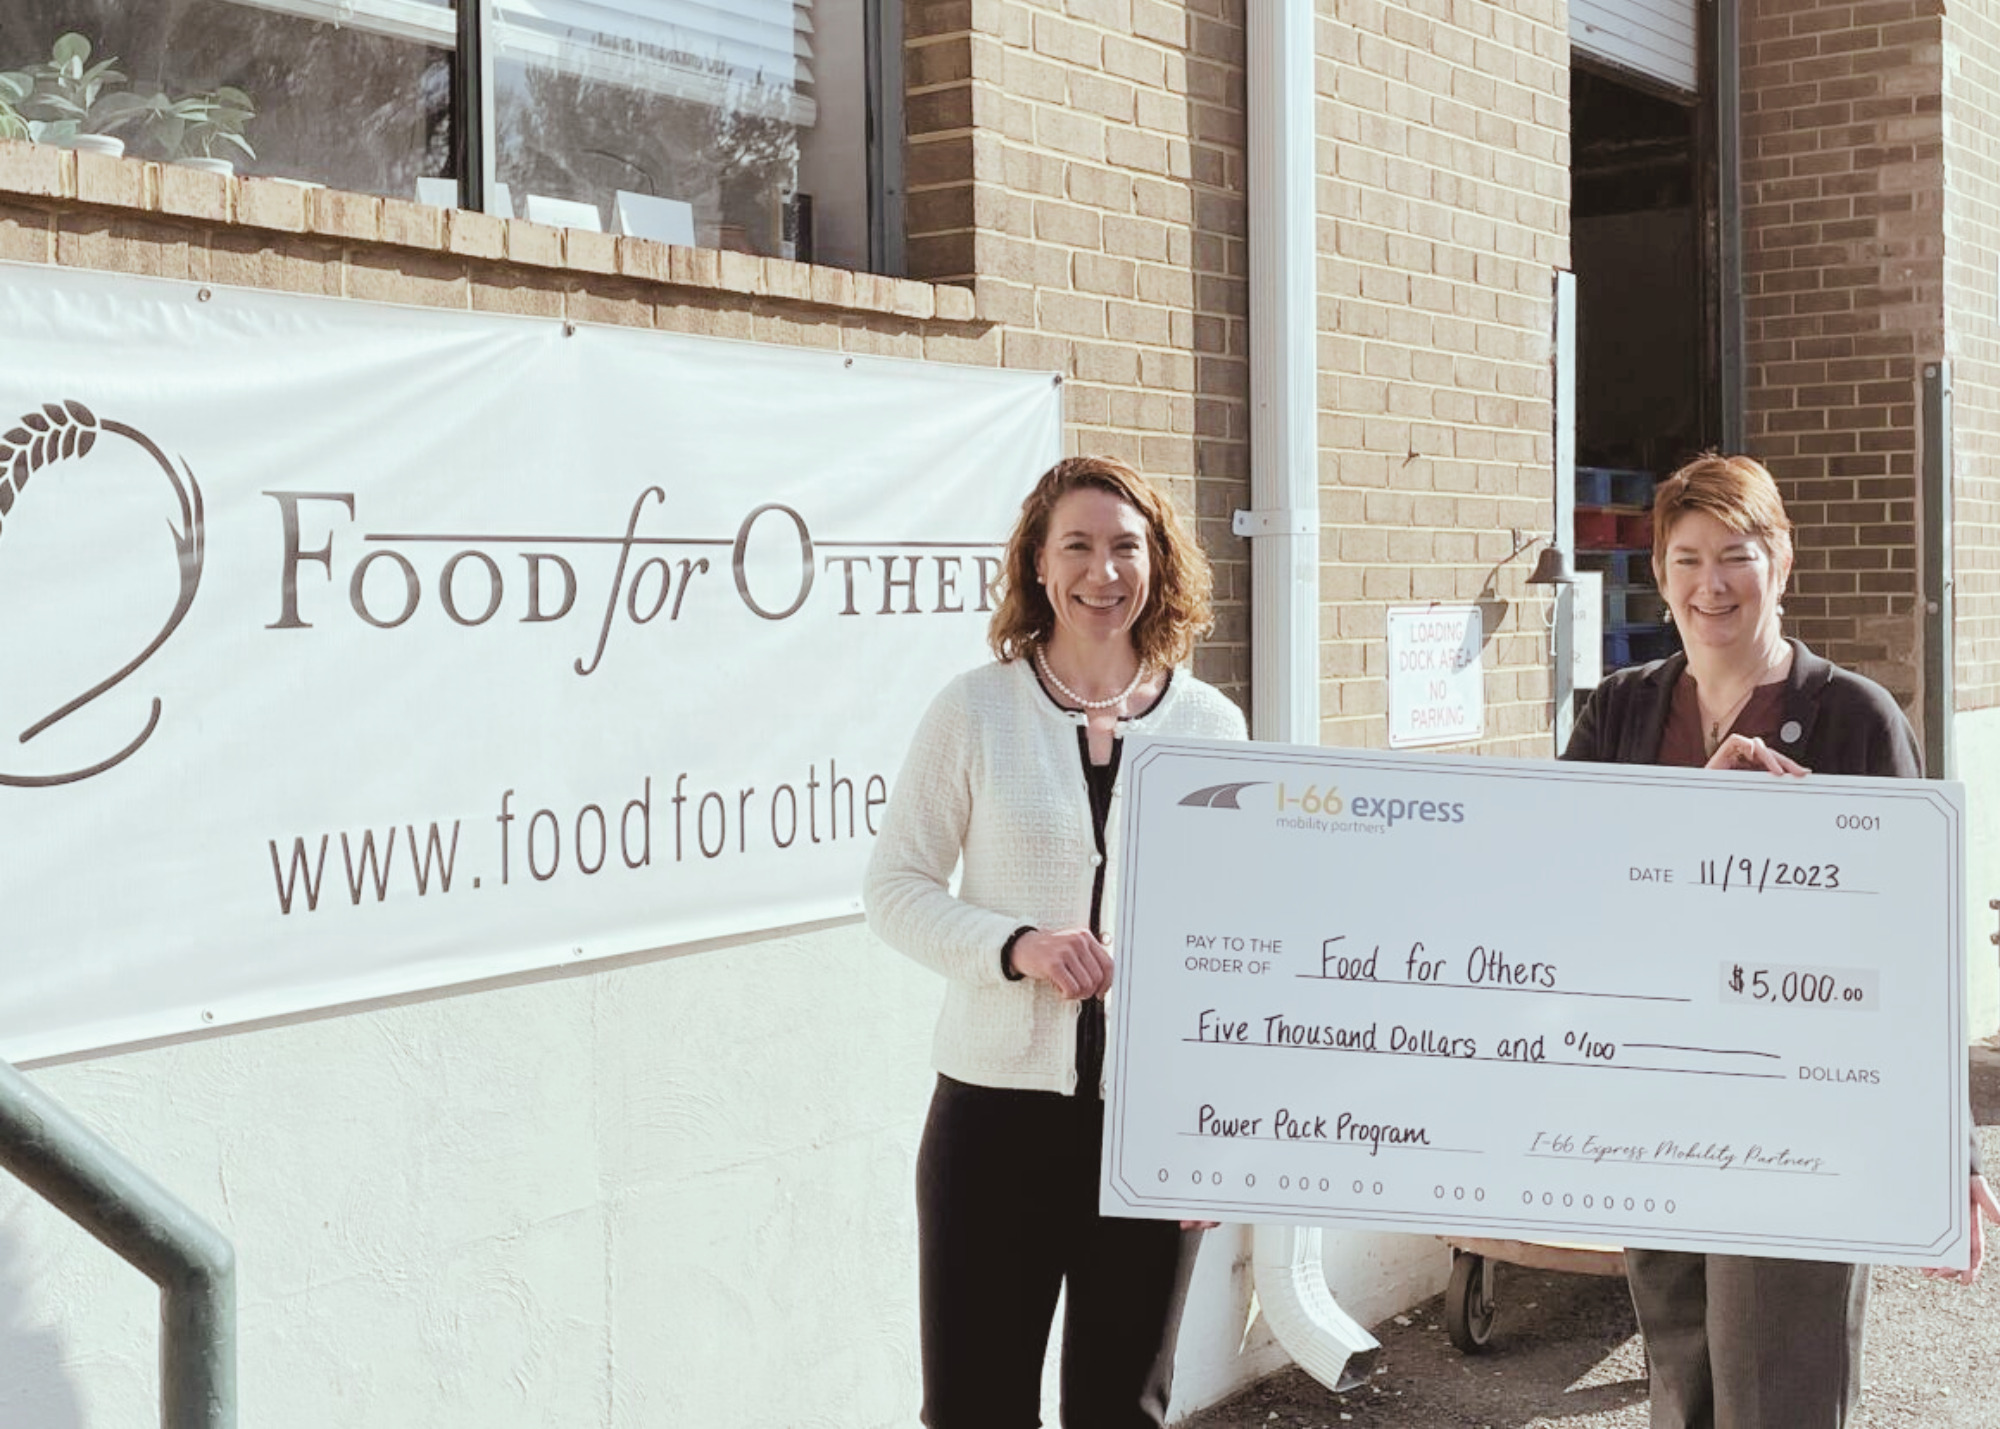 I-66 EMP Contributes $5,000 Toward Food for Others’ Power Pack Program